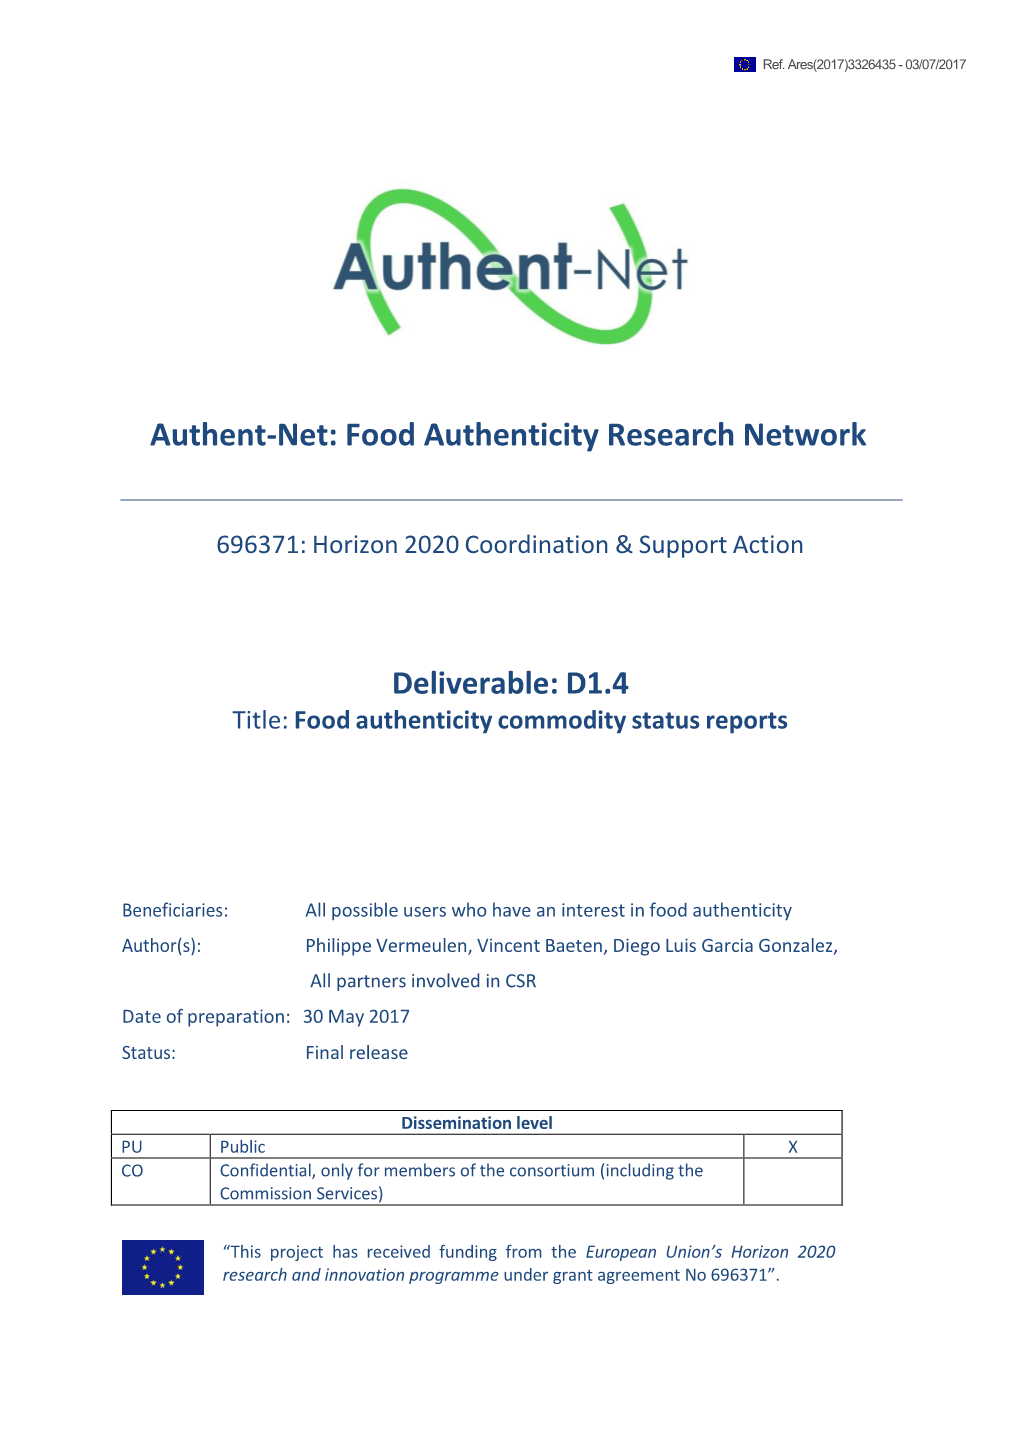 Food Authenticity Commodity Status Reports